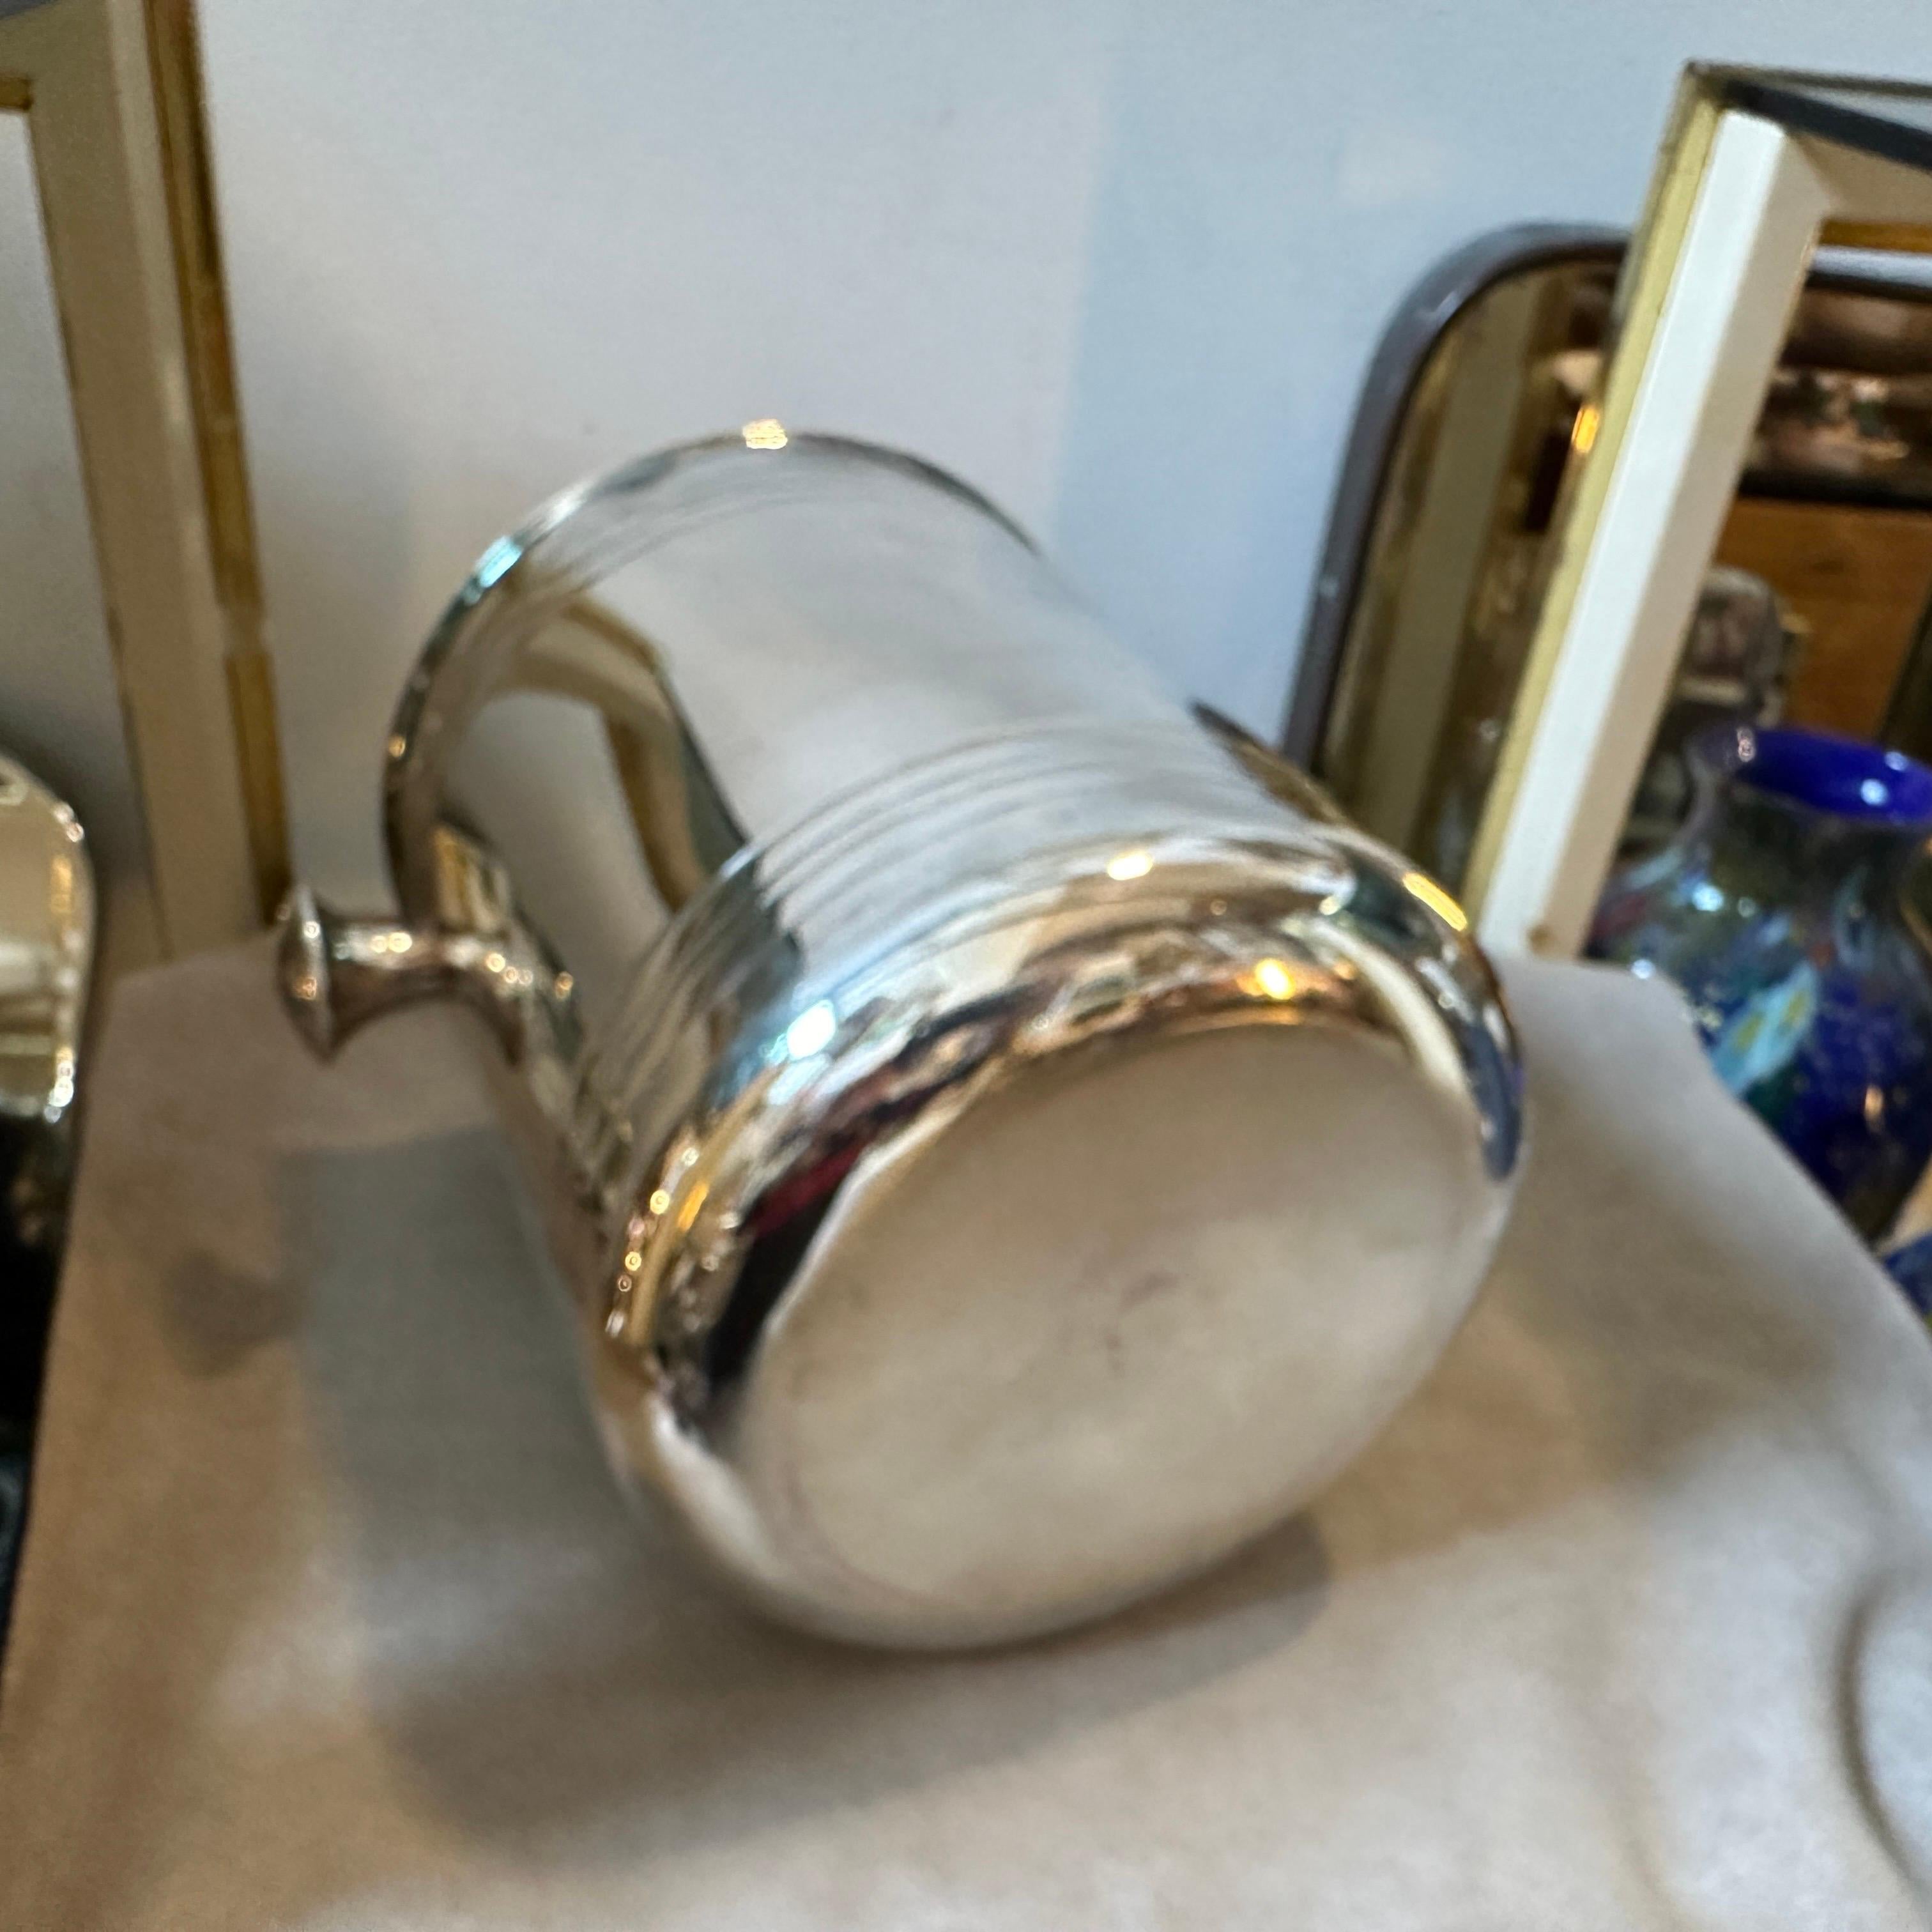 1980s Modernist Silver Plated French Wine Cooler by Christofle For Sale 6